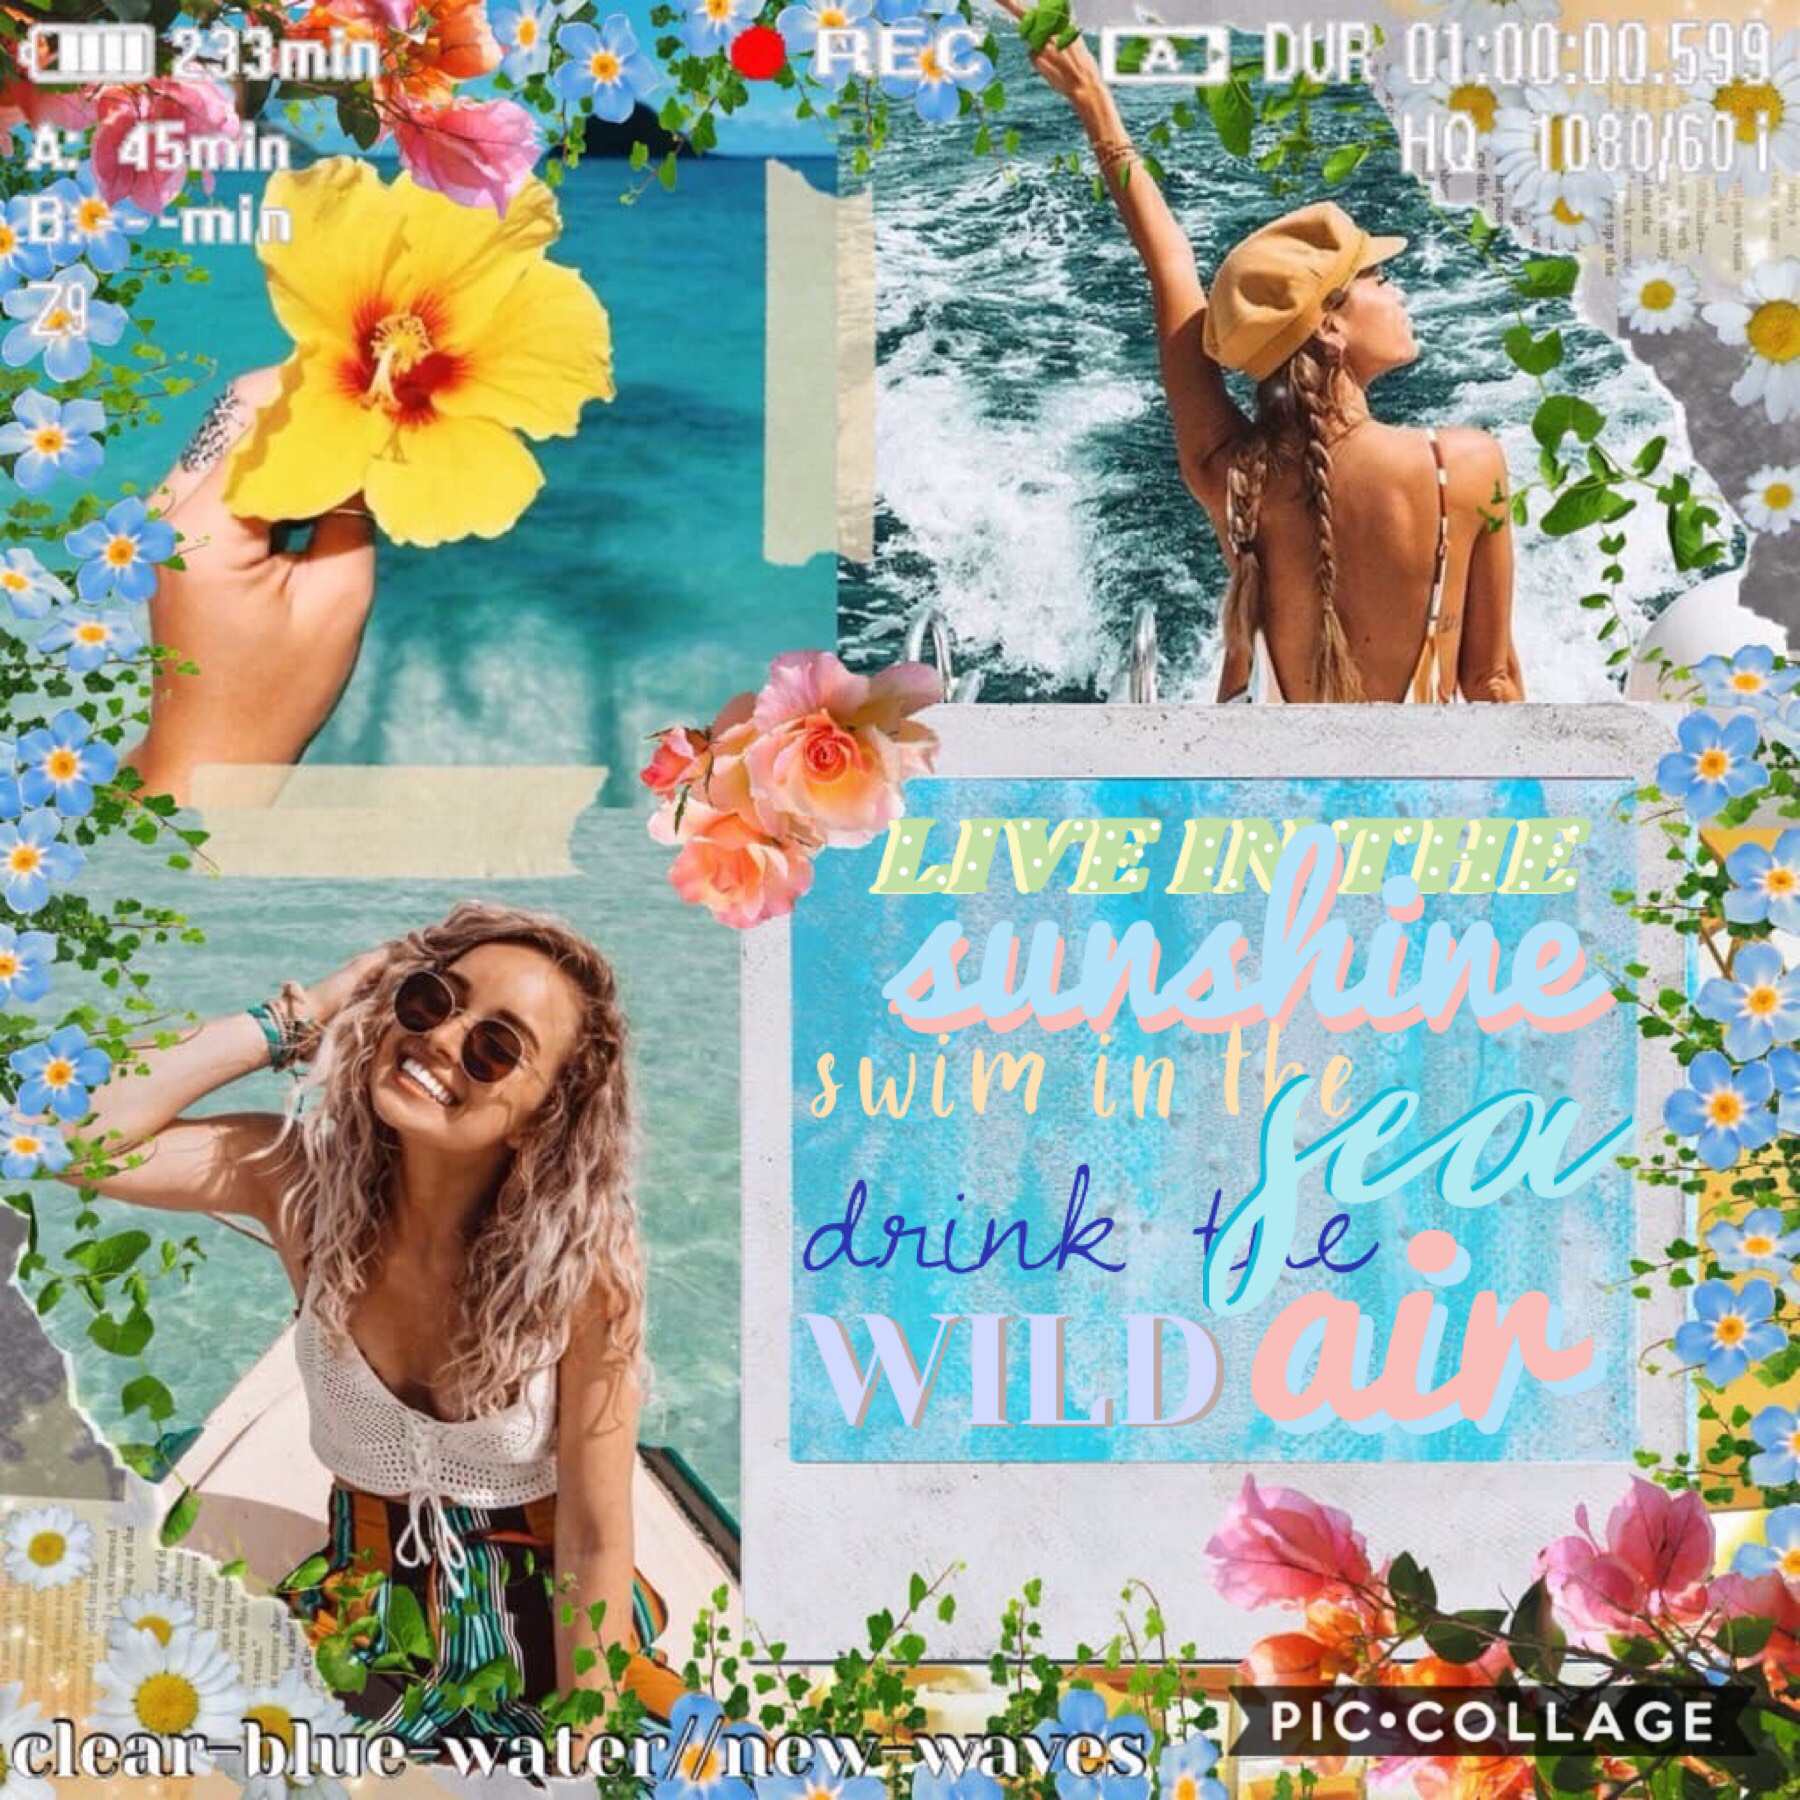 Collab With🥁...
clear-blue-water!!!💓💓 she’s so nice and makes AMAZING collages!🎨 Go follow her! Don’t forget to join my icon contest 💙🌼 and if you wanna collab just ask🌸🐠🎨
